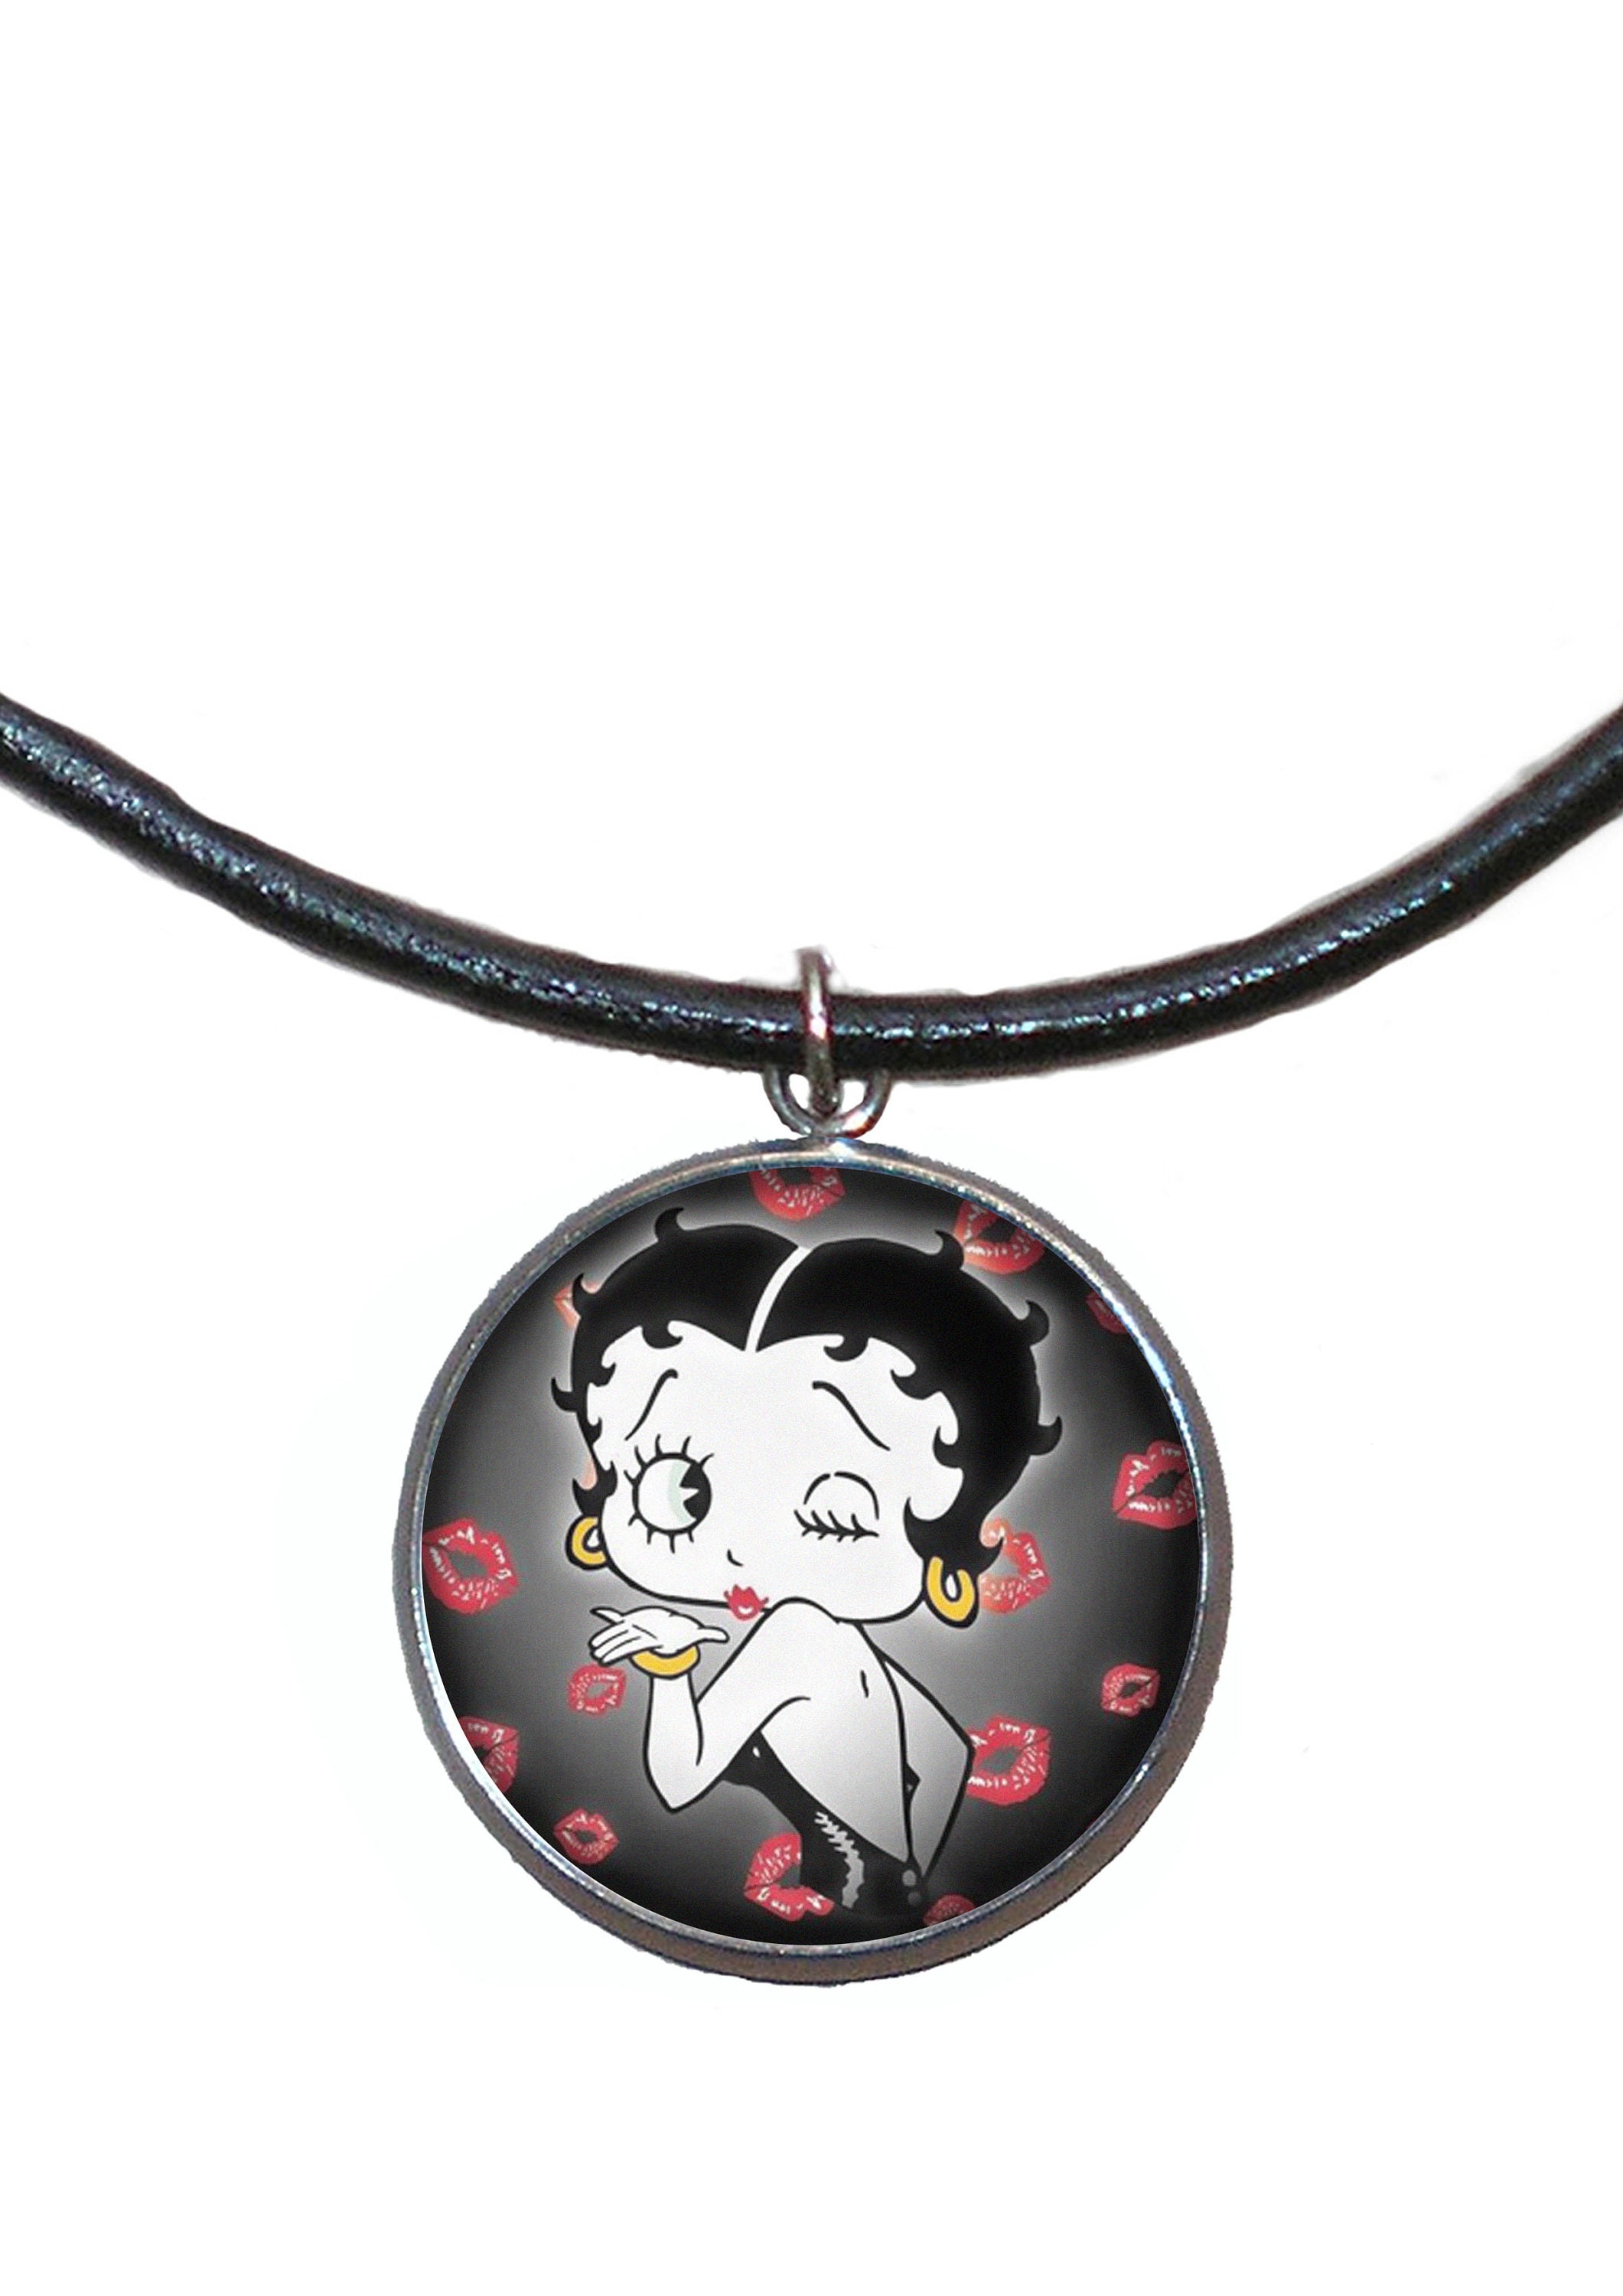 Black chain Betty Boop necklace pop culture Hollywood classic cartoon retro